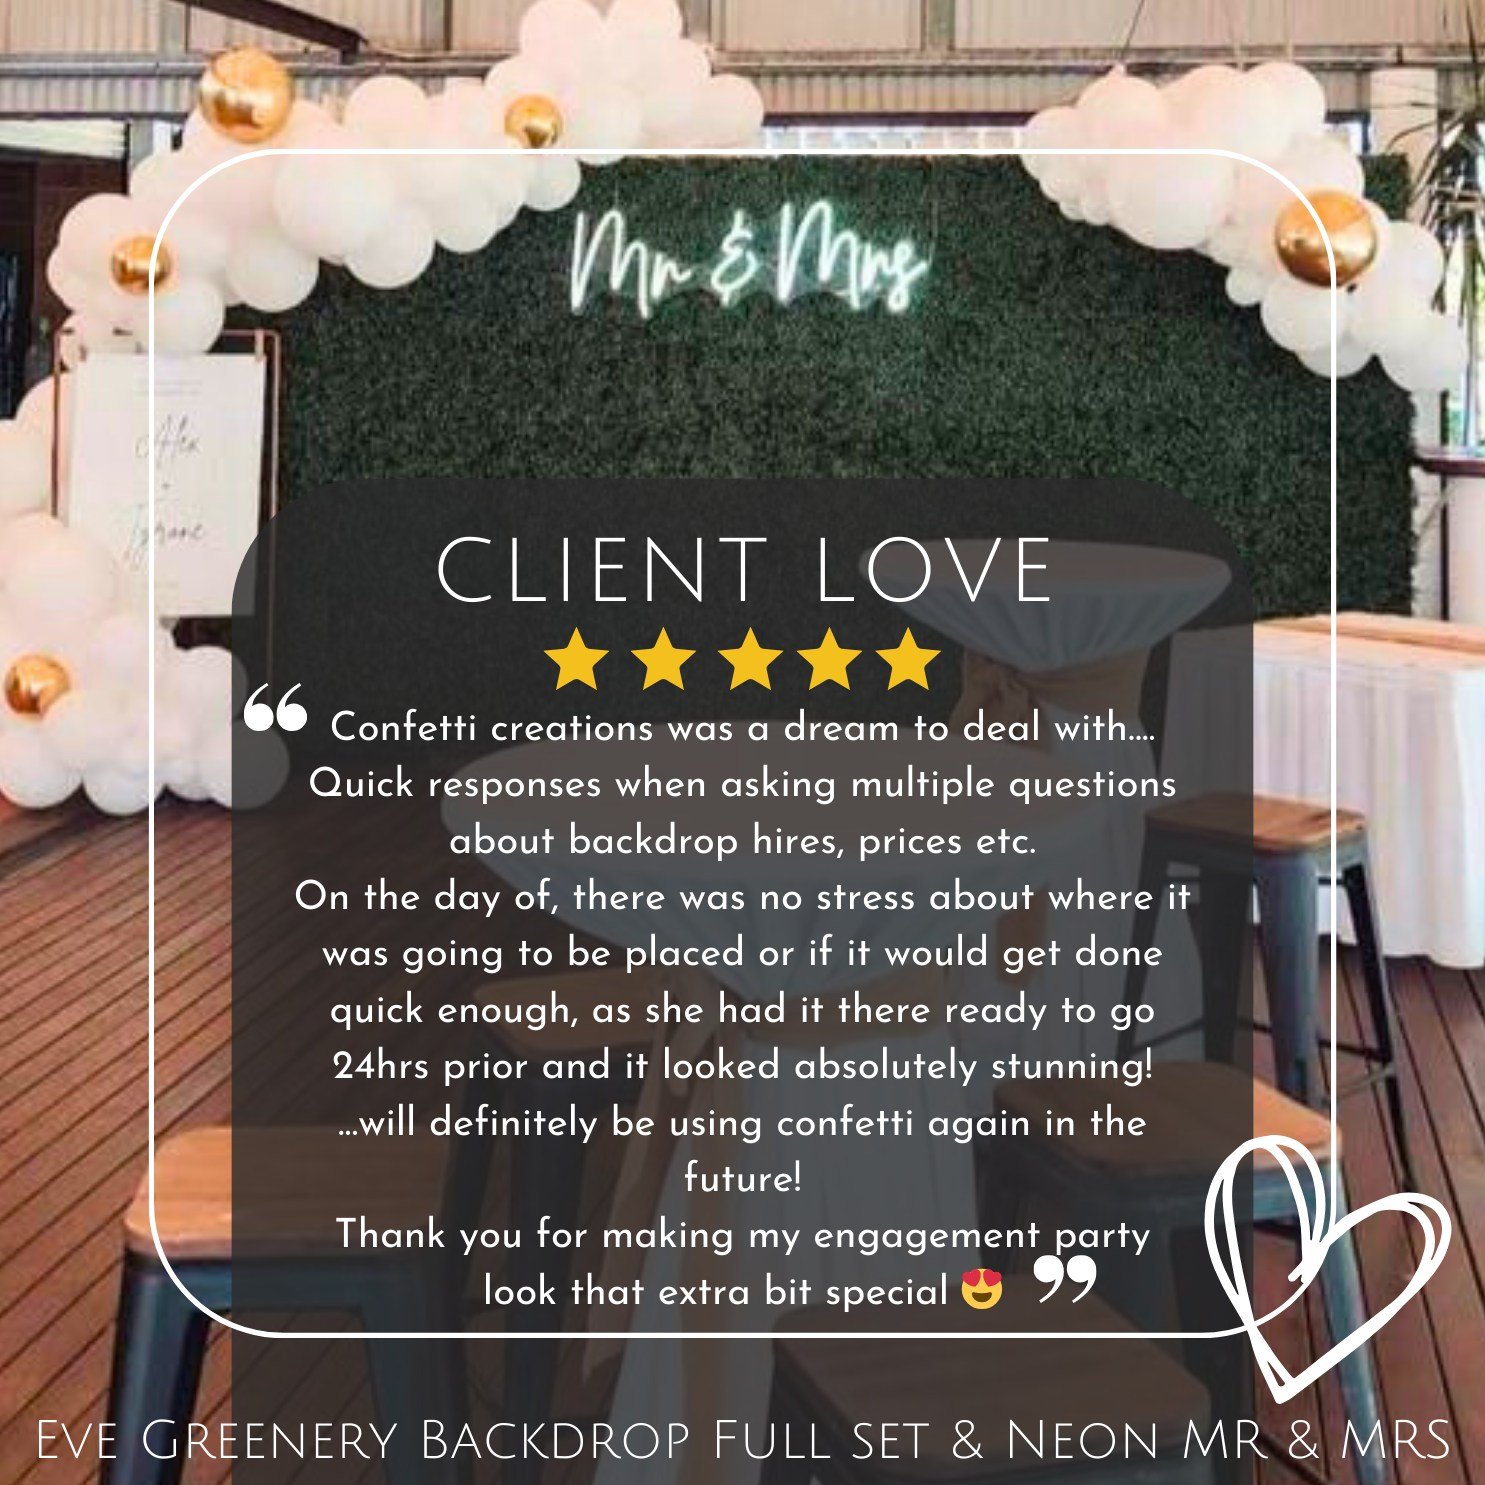 Another glowing review from a happy customer! 

Alex recently hired out our Eve Greenery Backdrop &amp; Neon Sign, we are thrilled to share her feedback. 

We are truly grateful for your kind words Alex, and are committed to delivering 5 star service